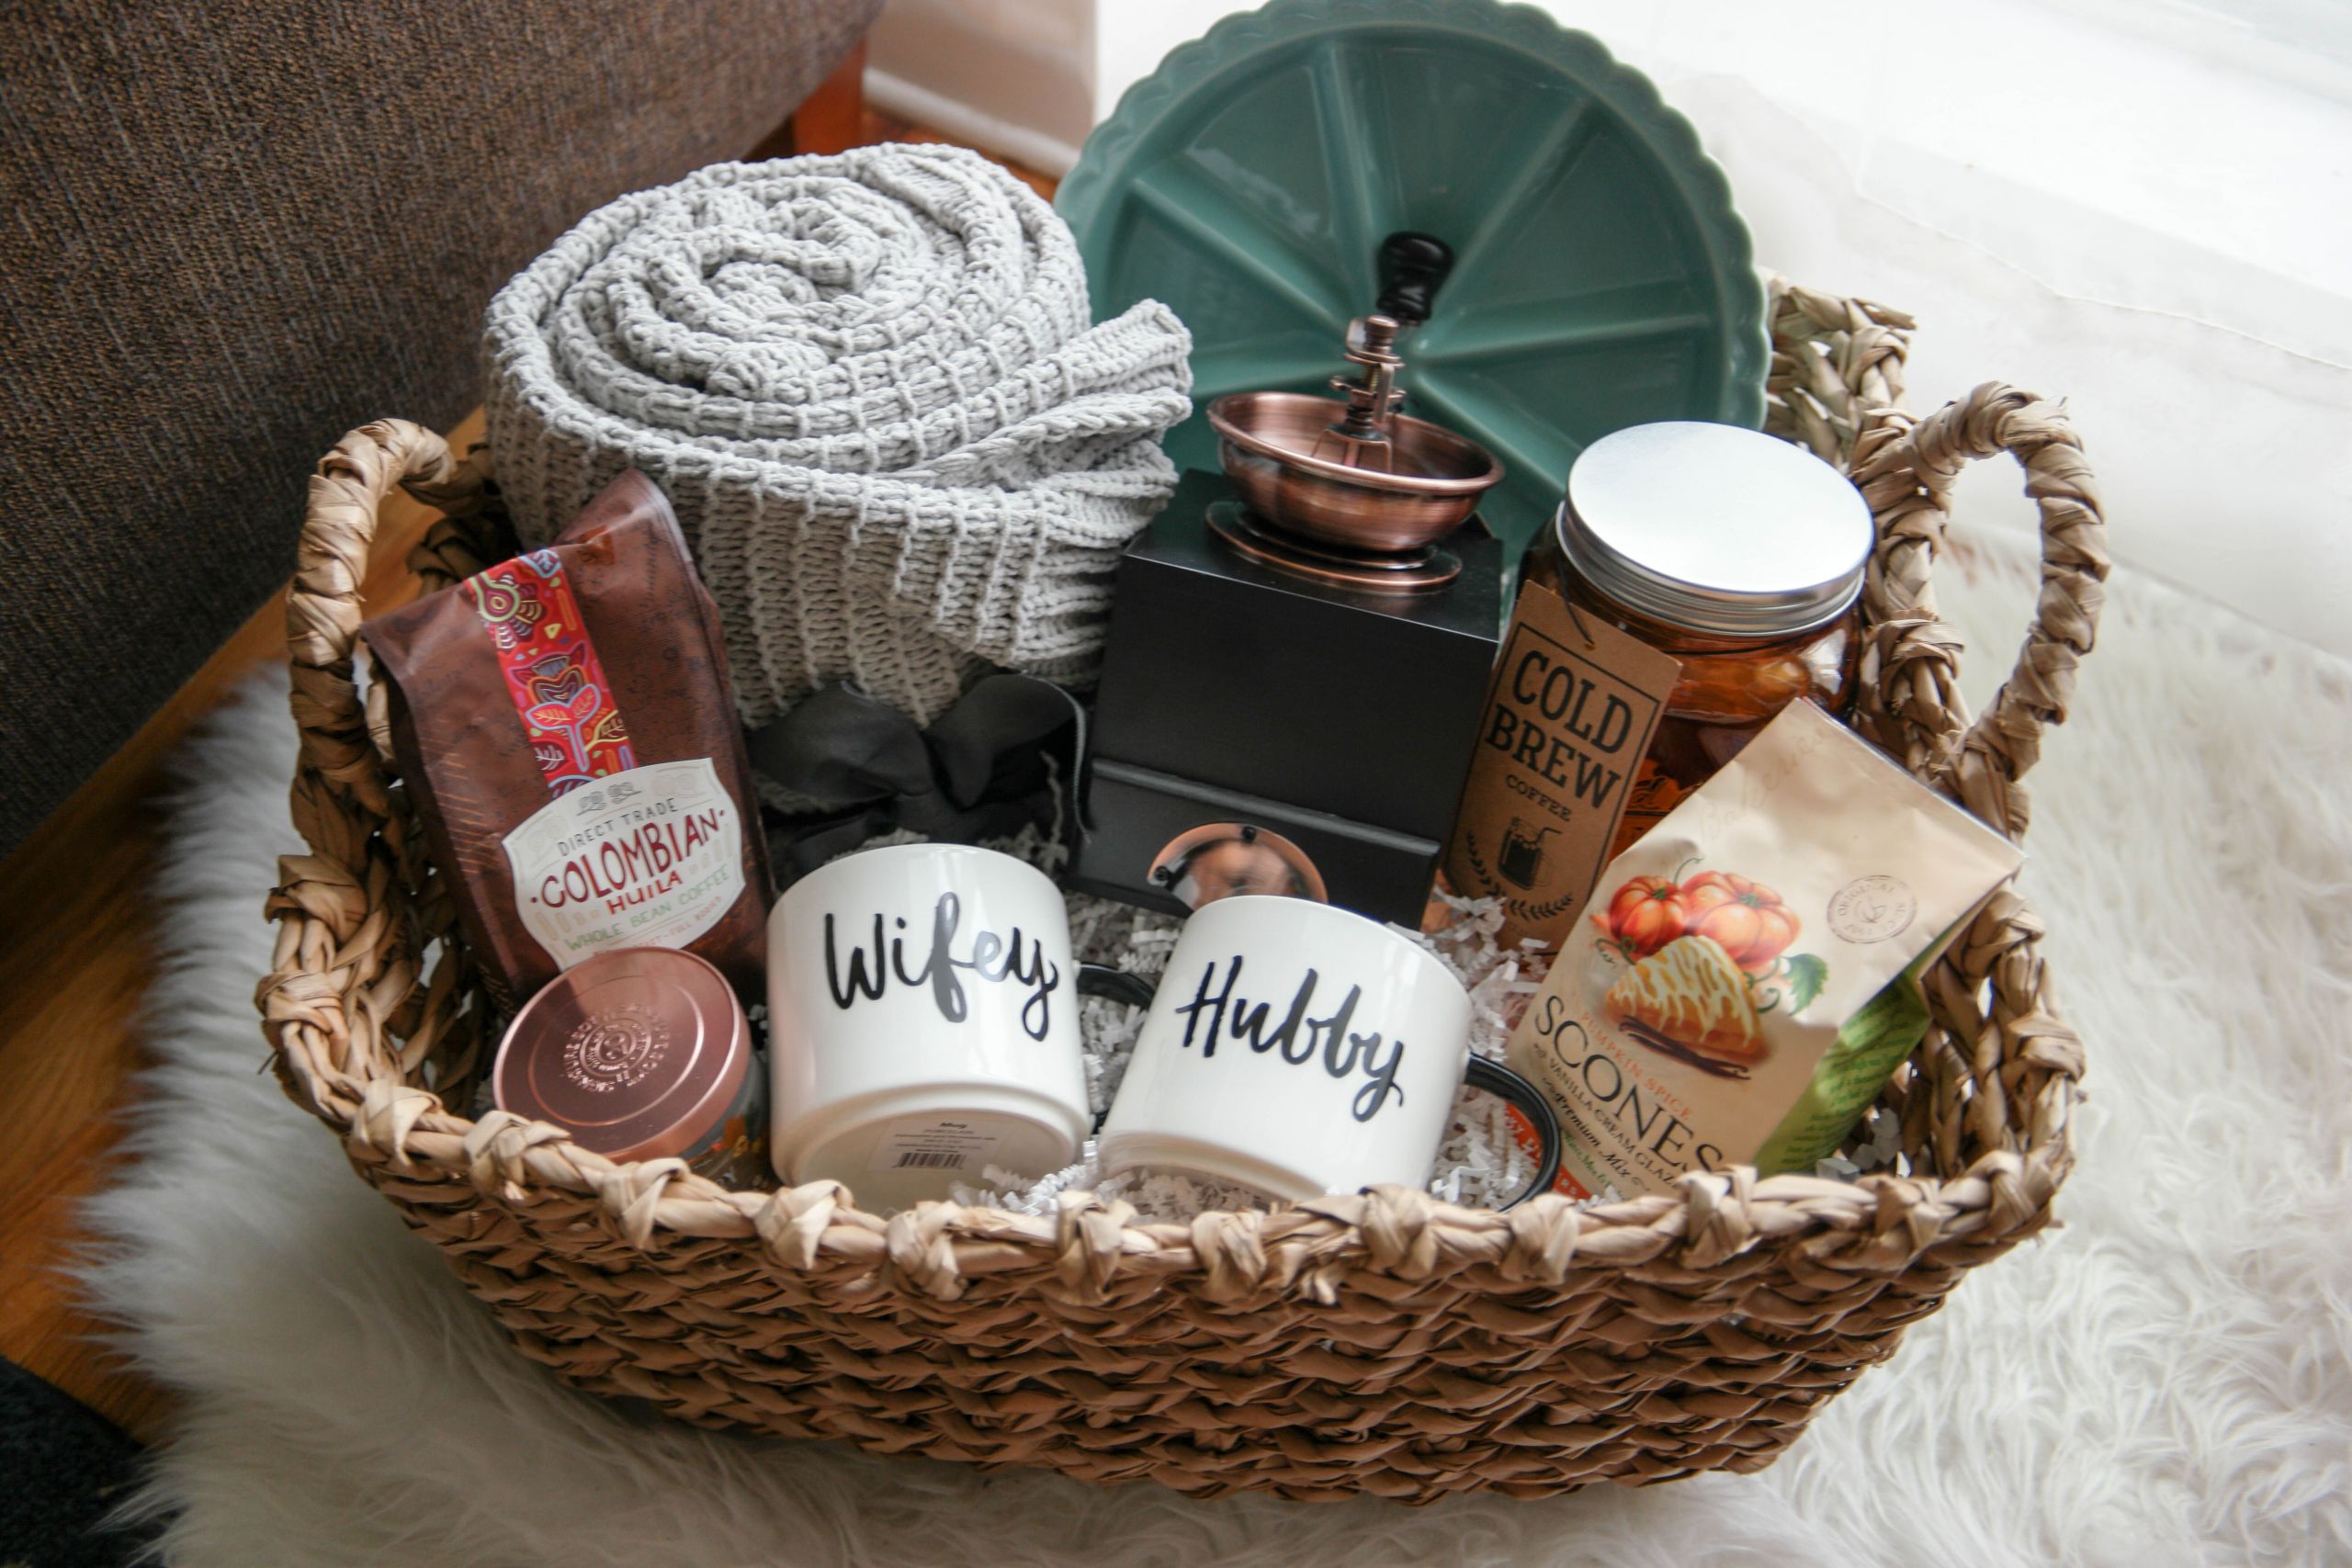 Cool Wedding Gift Ideas For Couples
 A Cozy Morning Gift Basket A Perfect Gift For Newlyweds